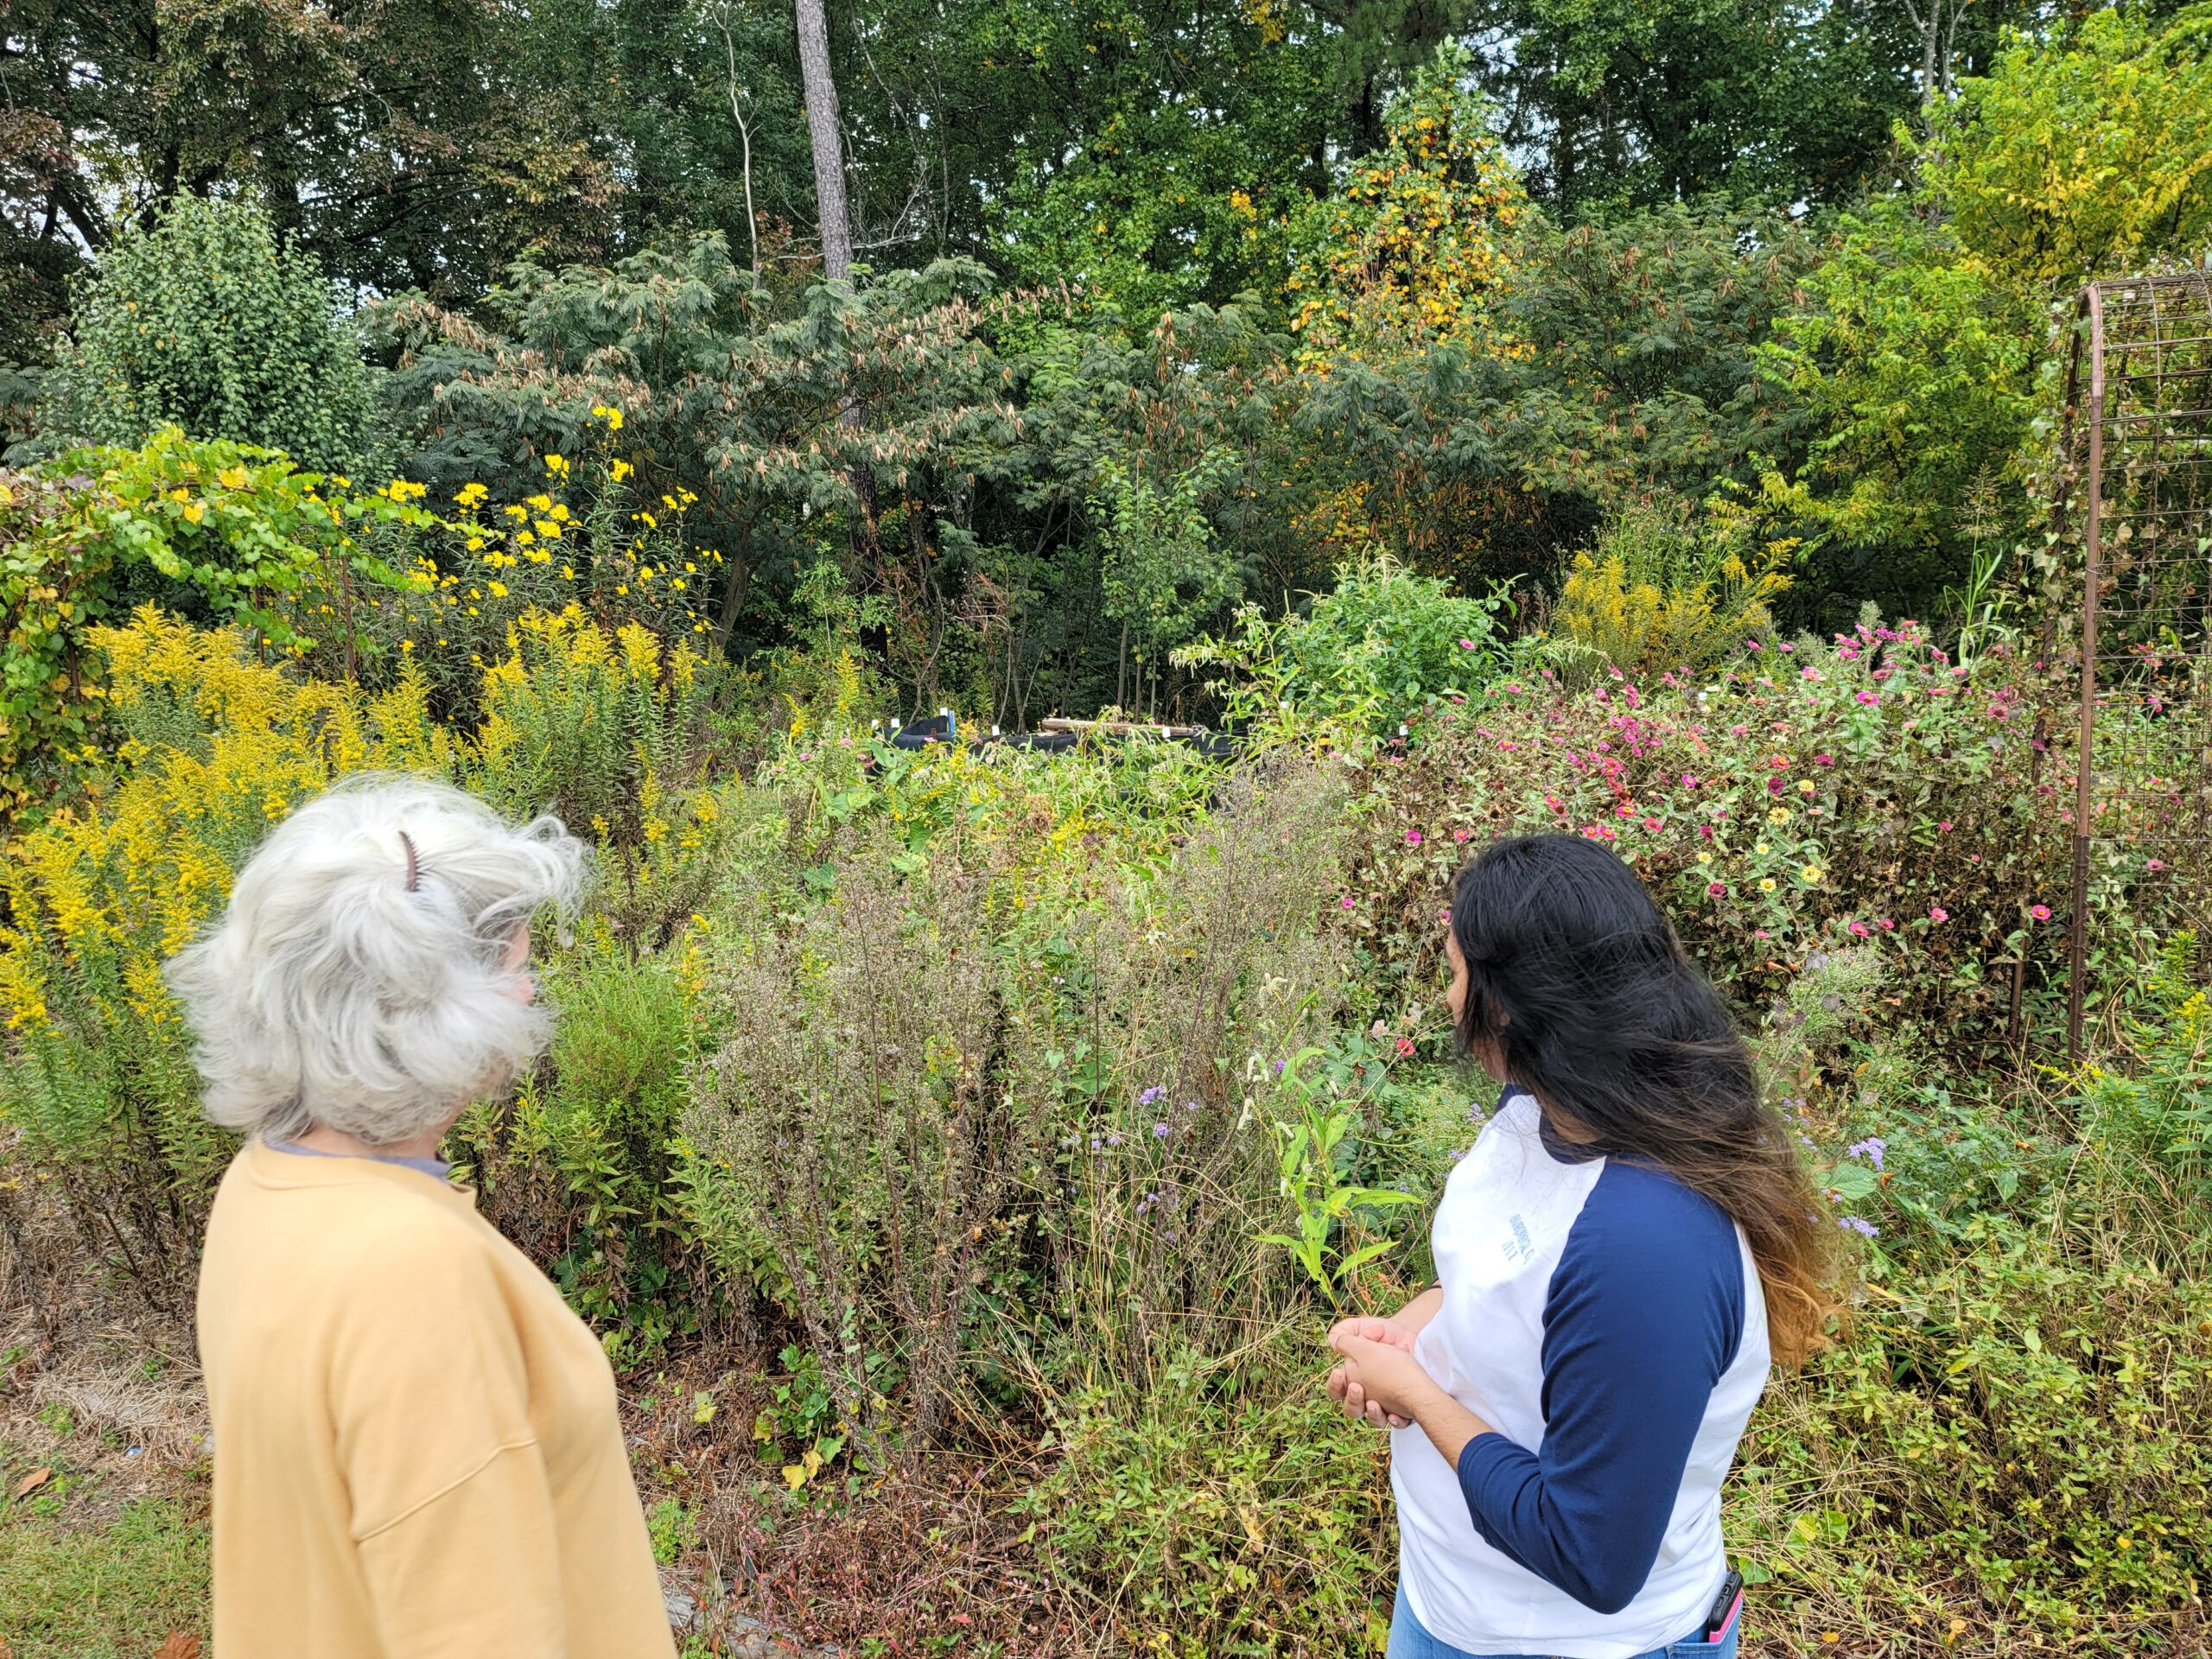 Two people face away from camera, looking at abundance pollinator habitat with pink and yellow flowers.